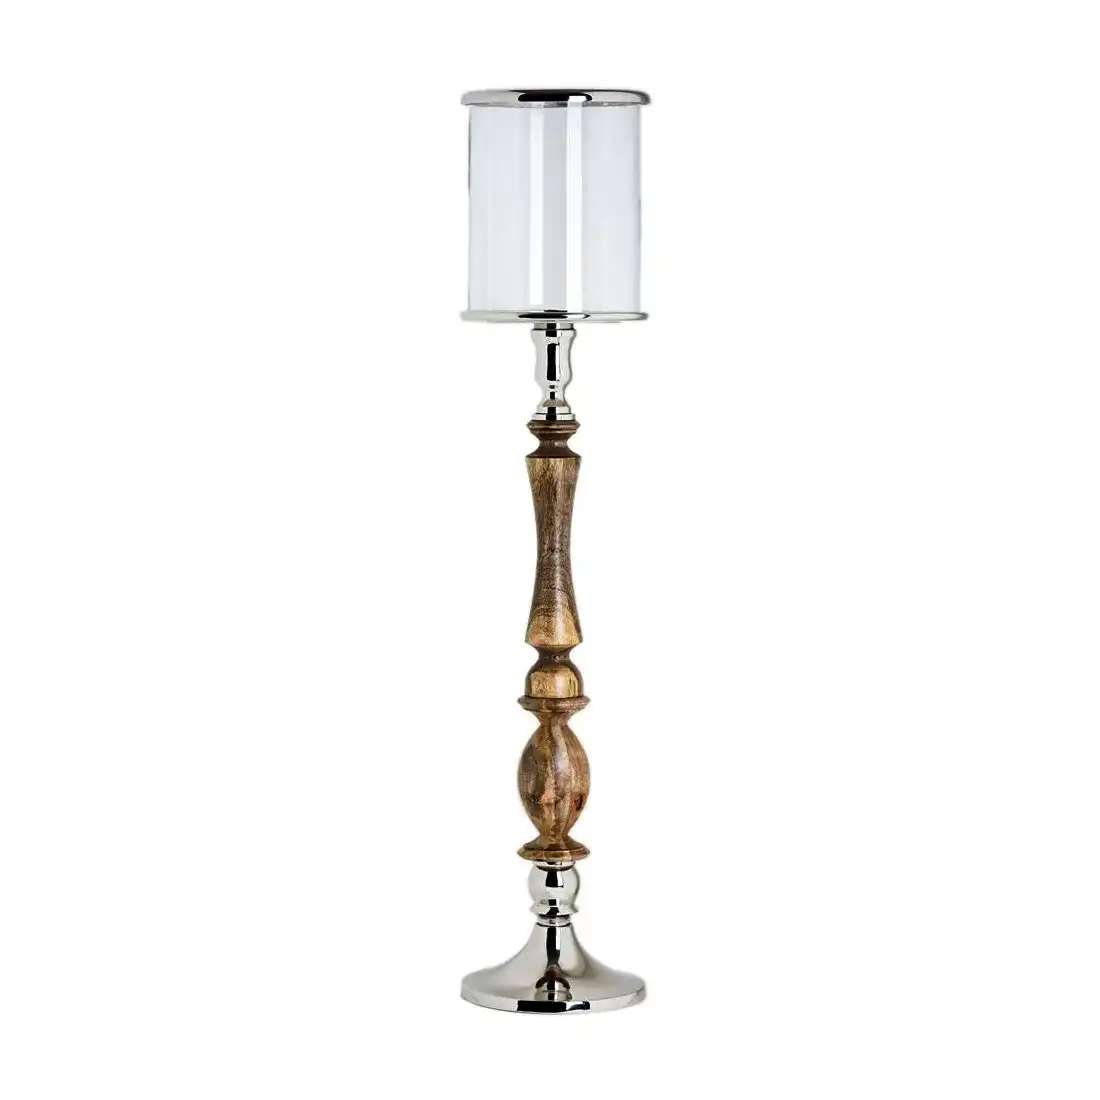 SSH Collection Donna 108cm Tall Hurricane Lamp - Natural Timber and Polished Nickel